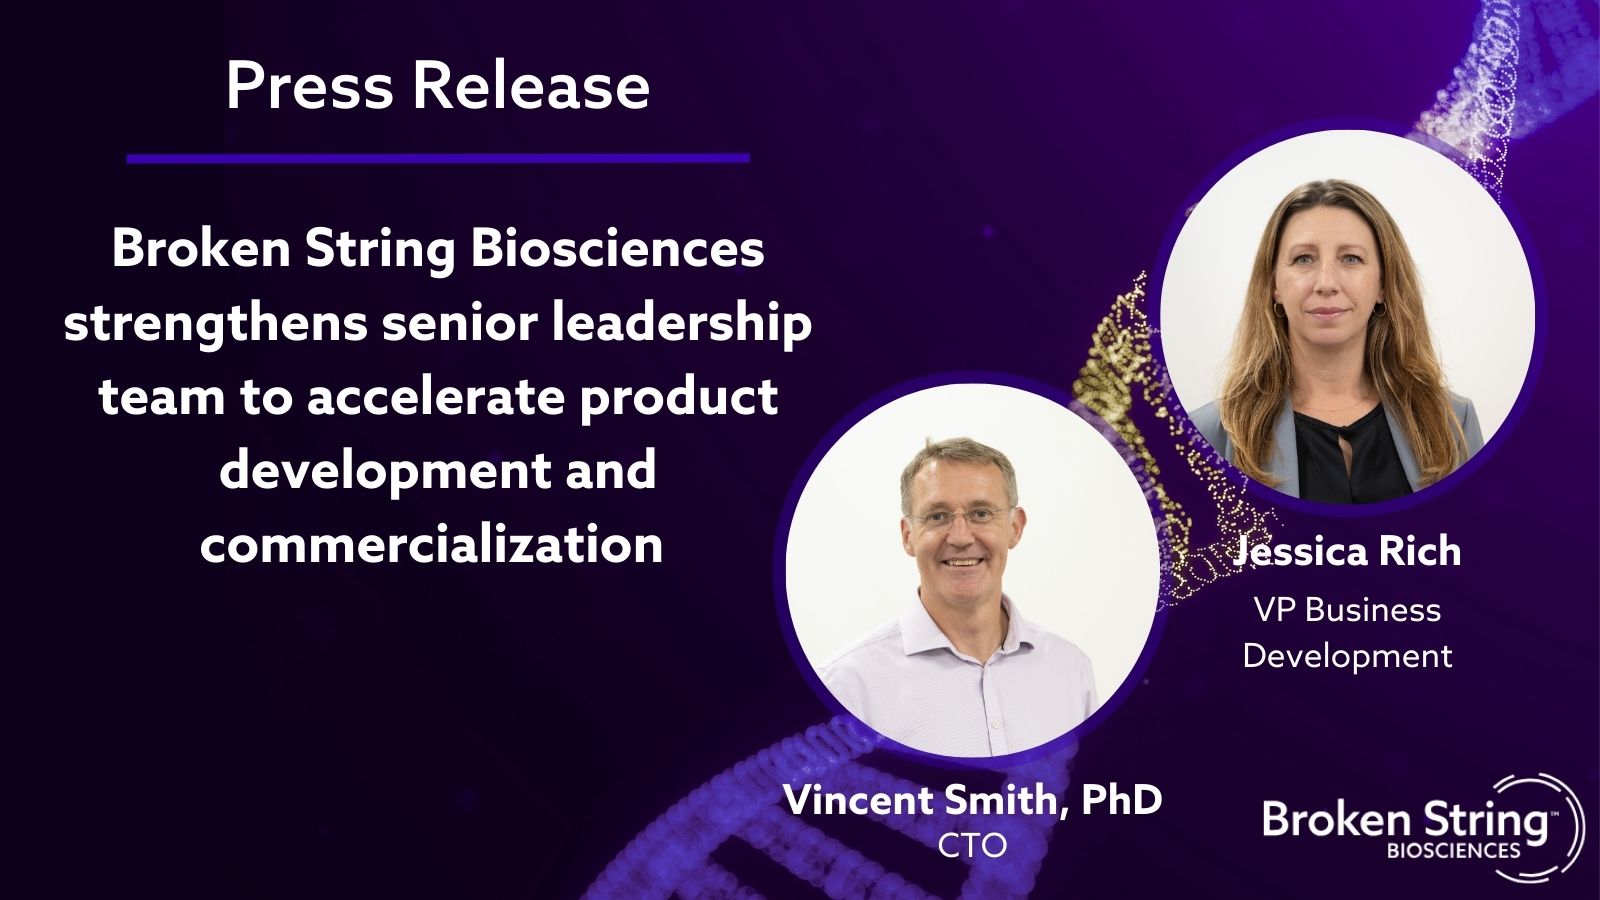 Broken String Biosciences strengthens senior leadership team to accelerate product development and commercialization